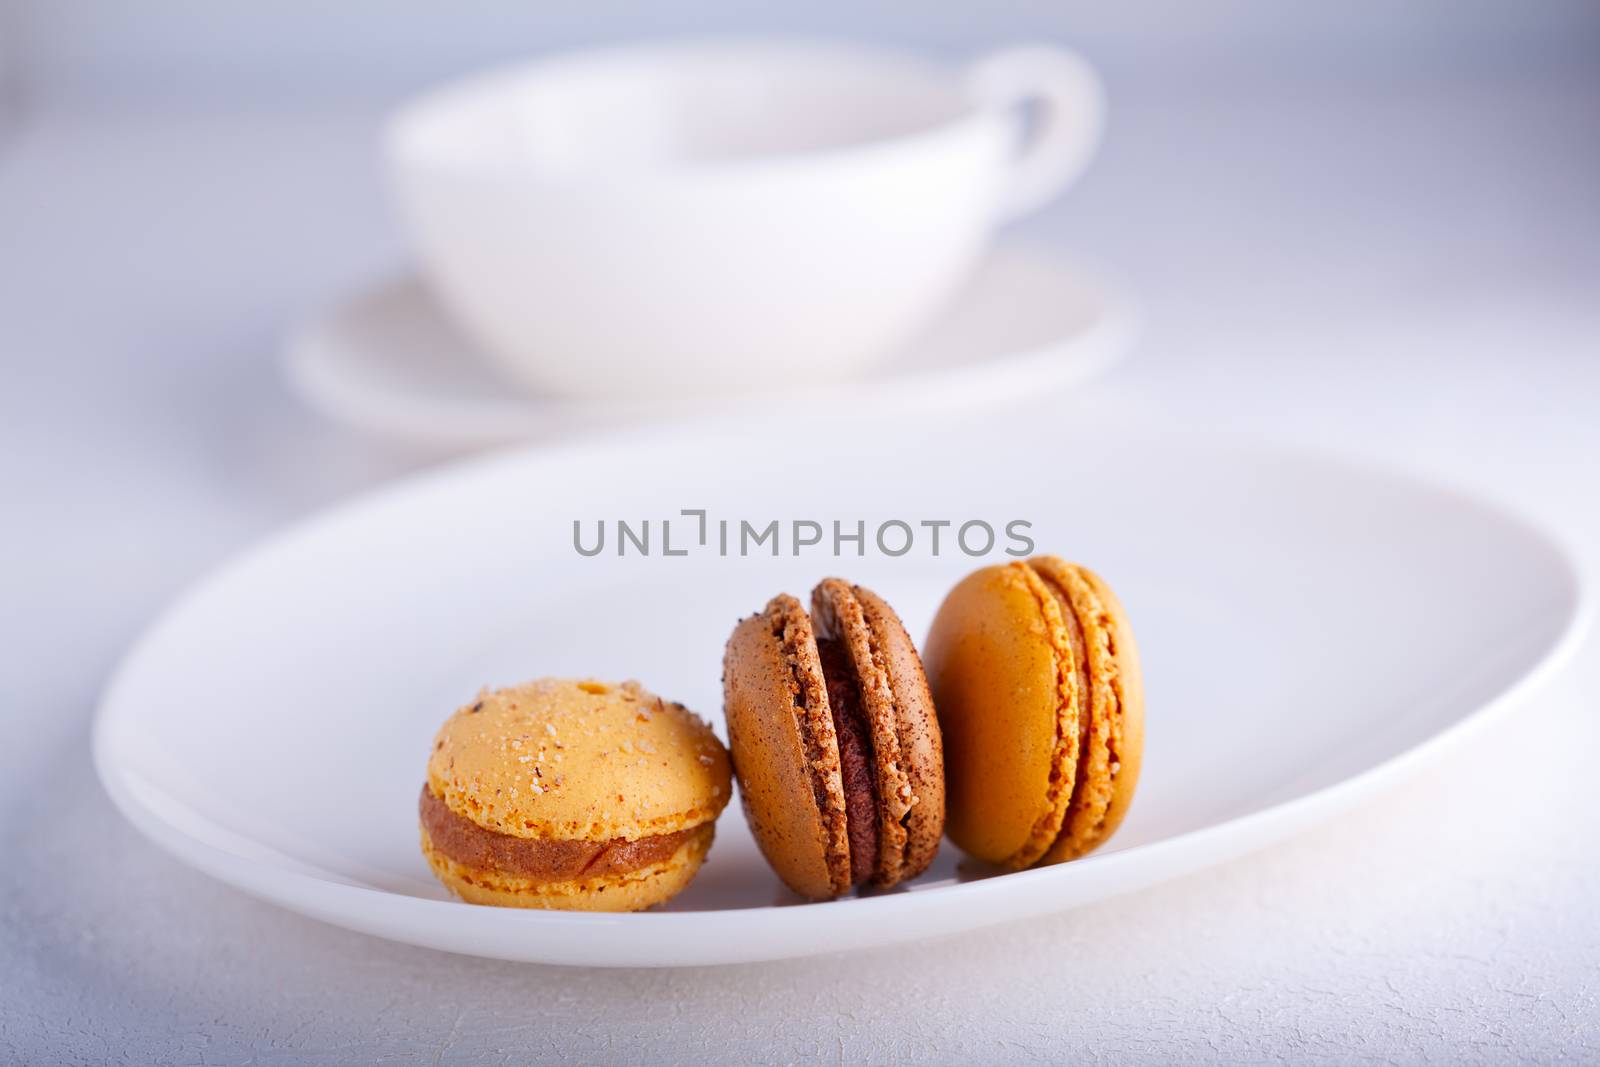 Almond cookies French macaroons by supercat67